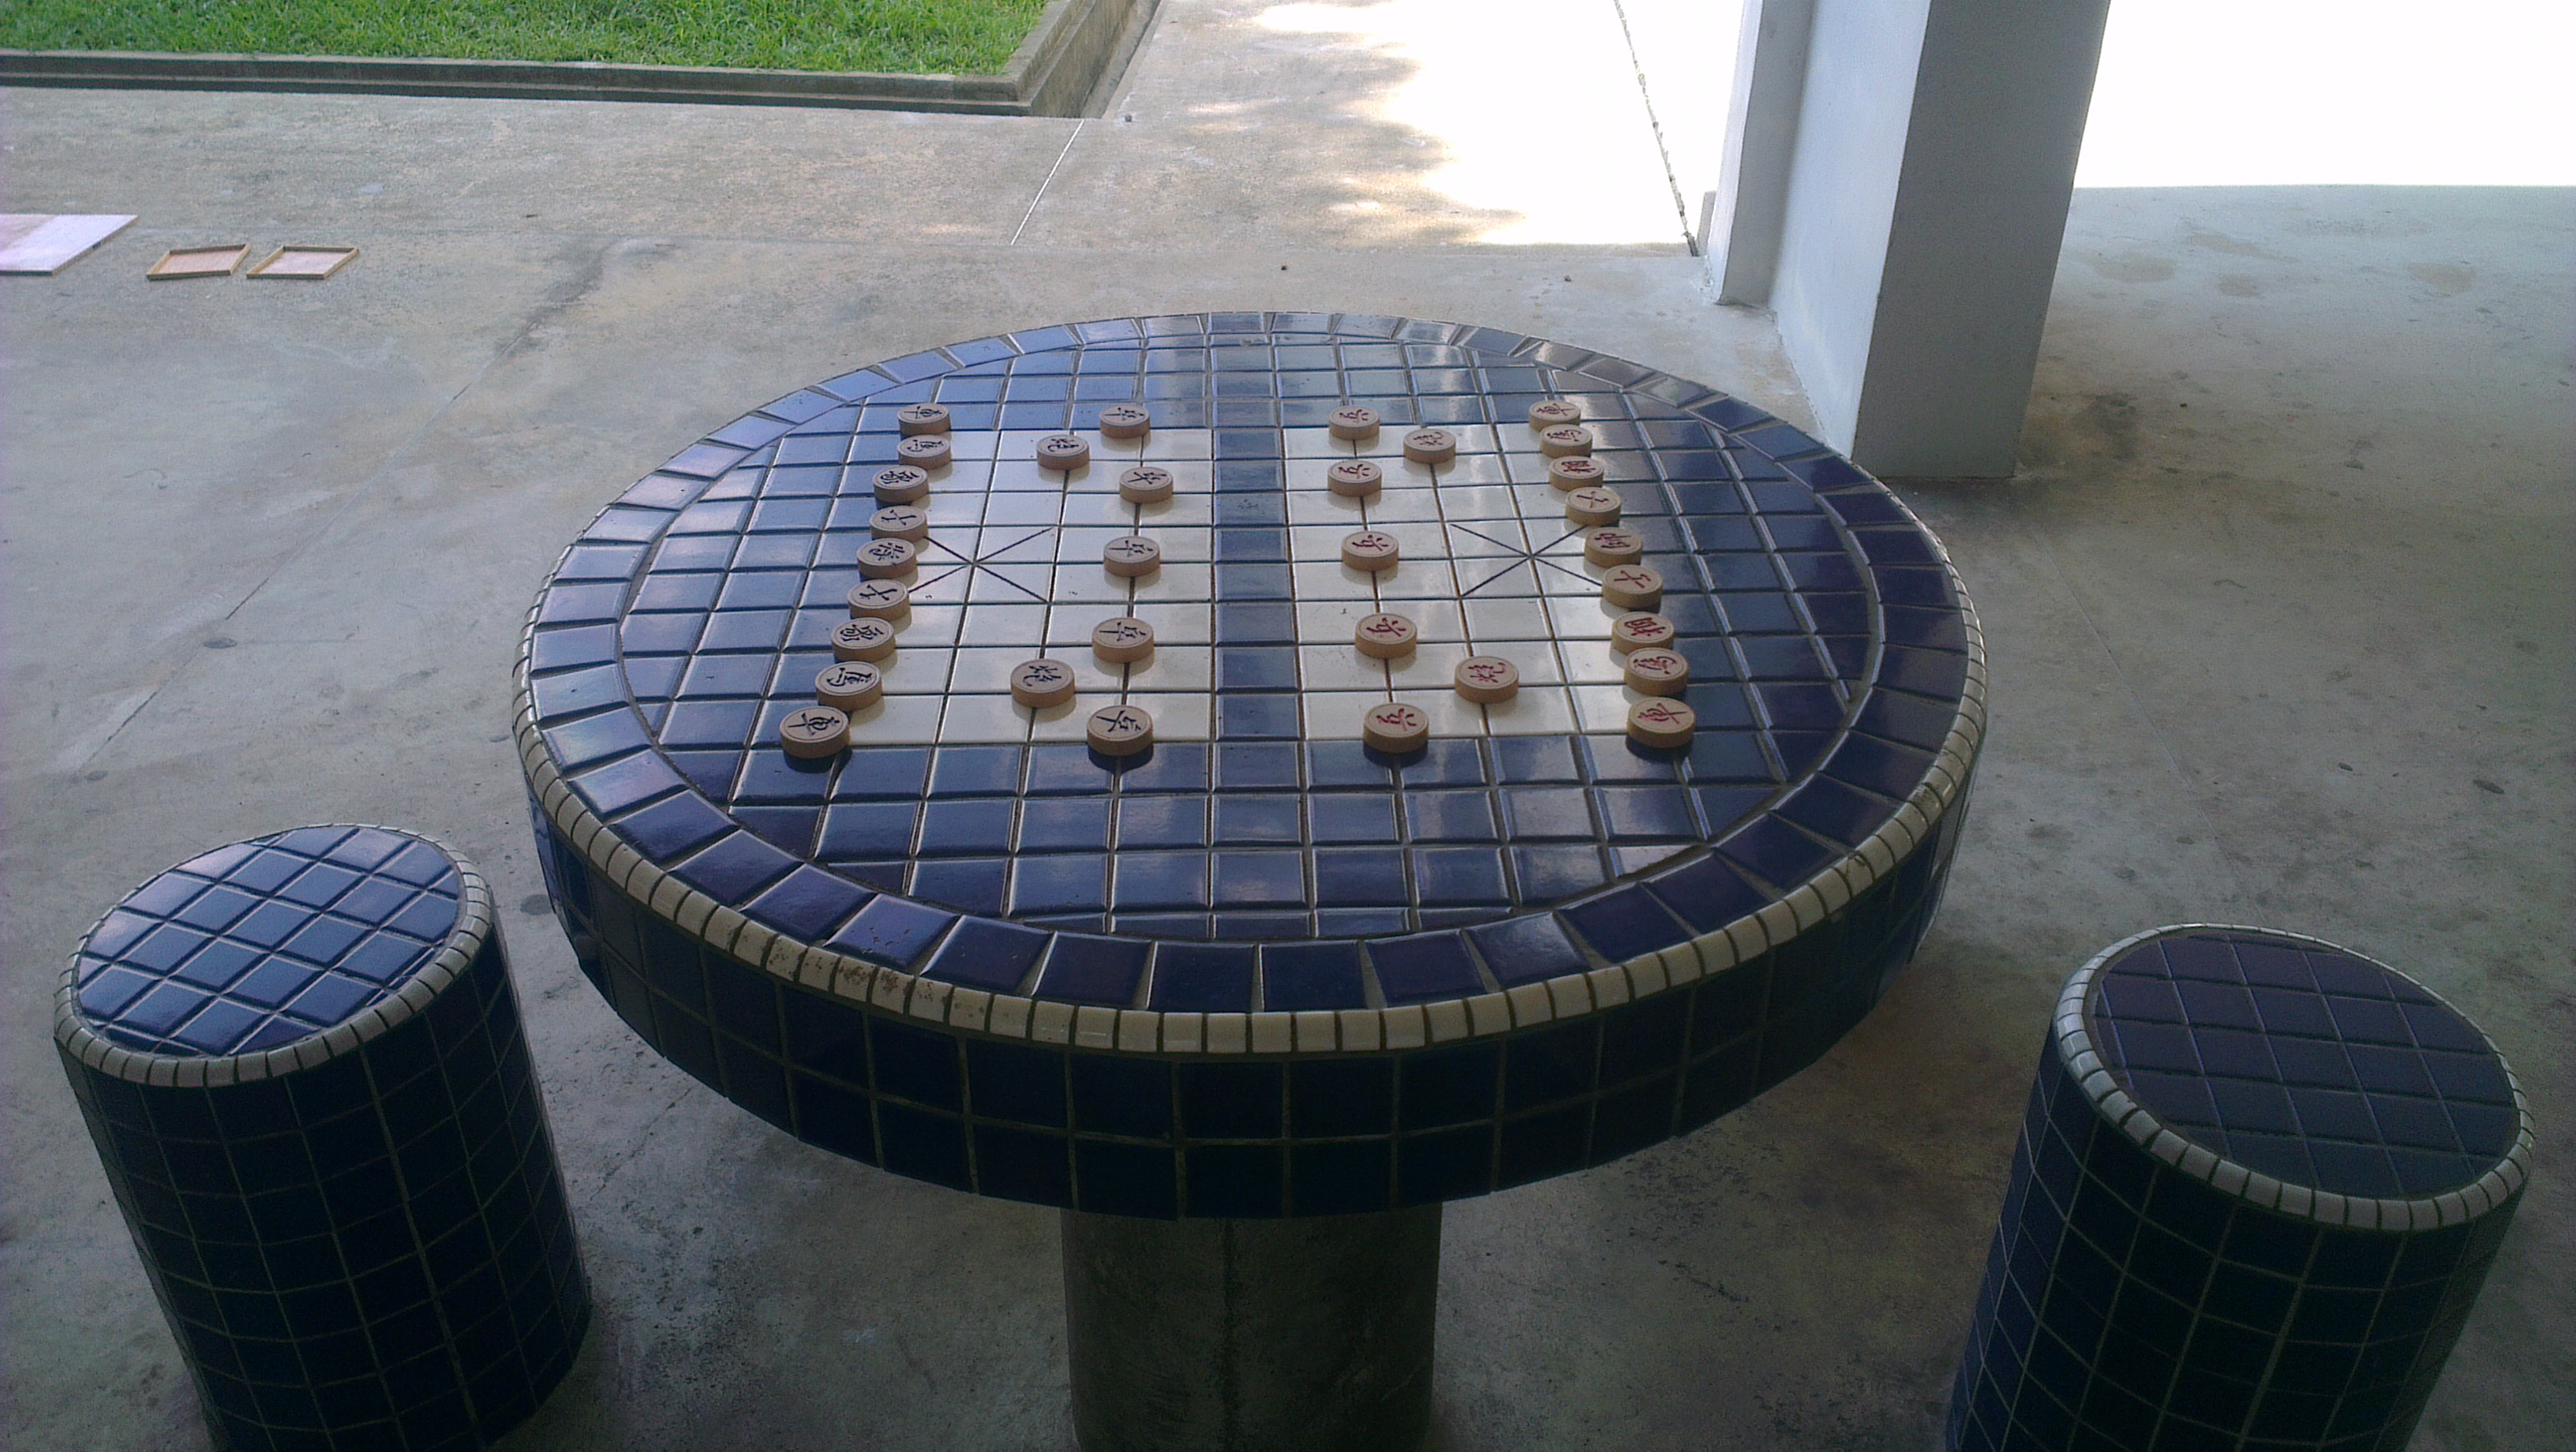 Xiangqi Board from the void deck of a HDB flat in Singapore